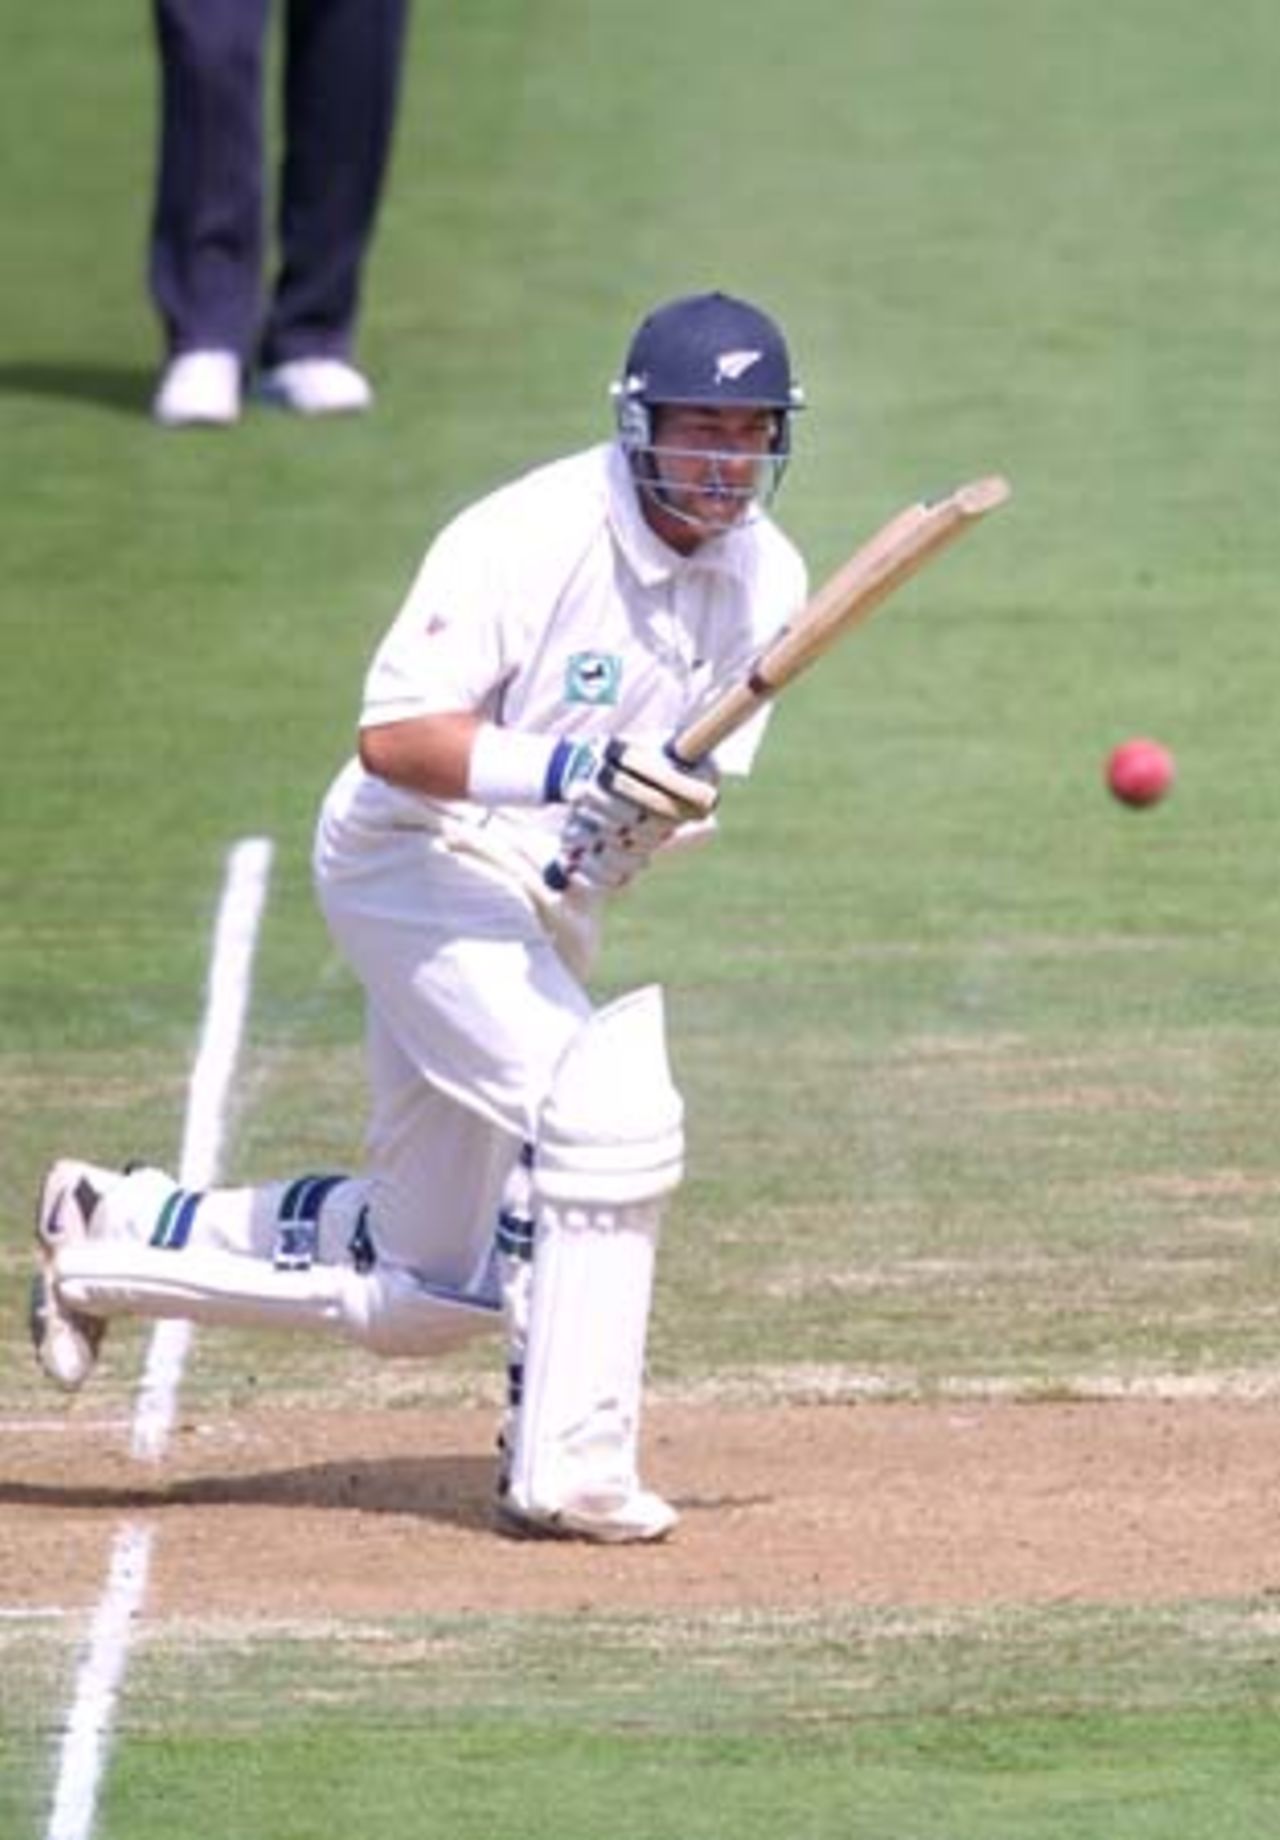 New Zealand batsman Craig McMillan plays a ball into the off side during his first innings of 54. 1st Test: New Zealand v Pakistan at Eden Park, Auckland, 8-12 March 2001 (10 March 2001).